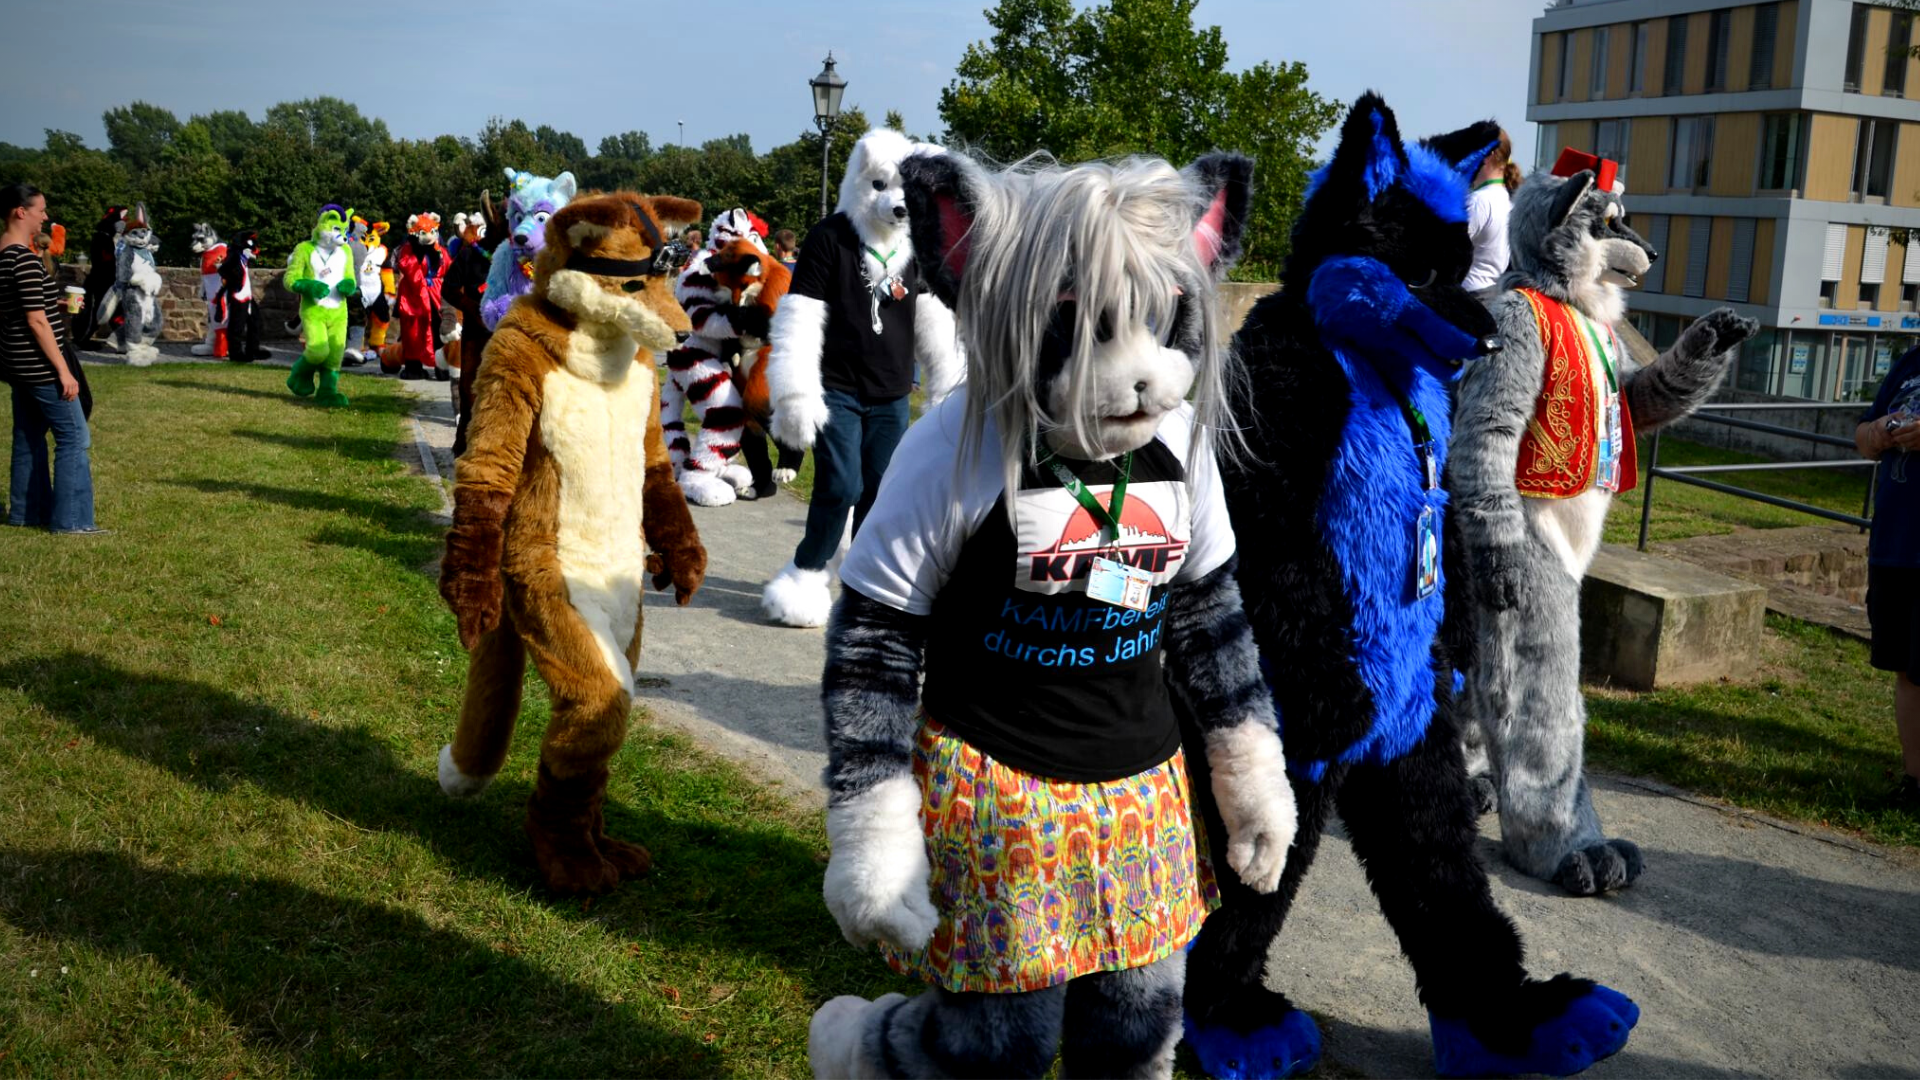 Furries Having Sex With Girl - Bad Journalism on 'Furries' Has Let Down Children and Animals